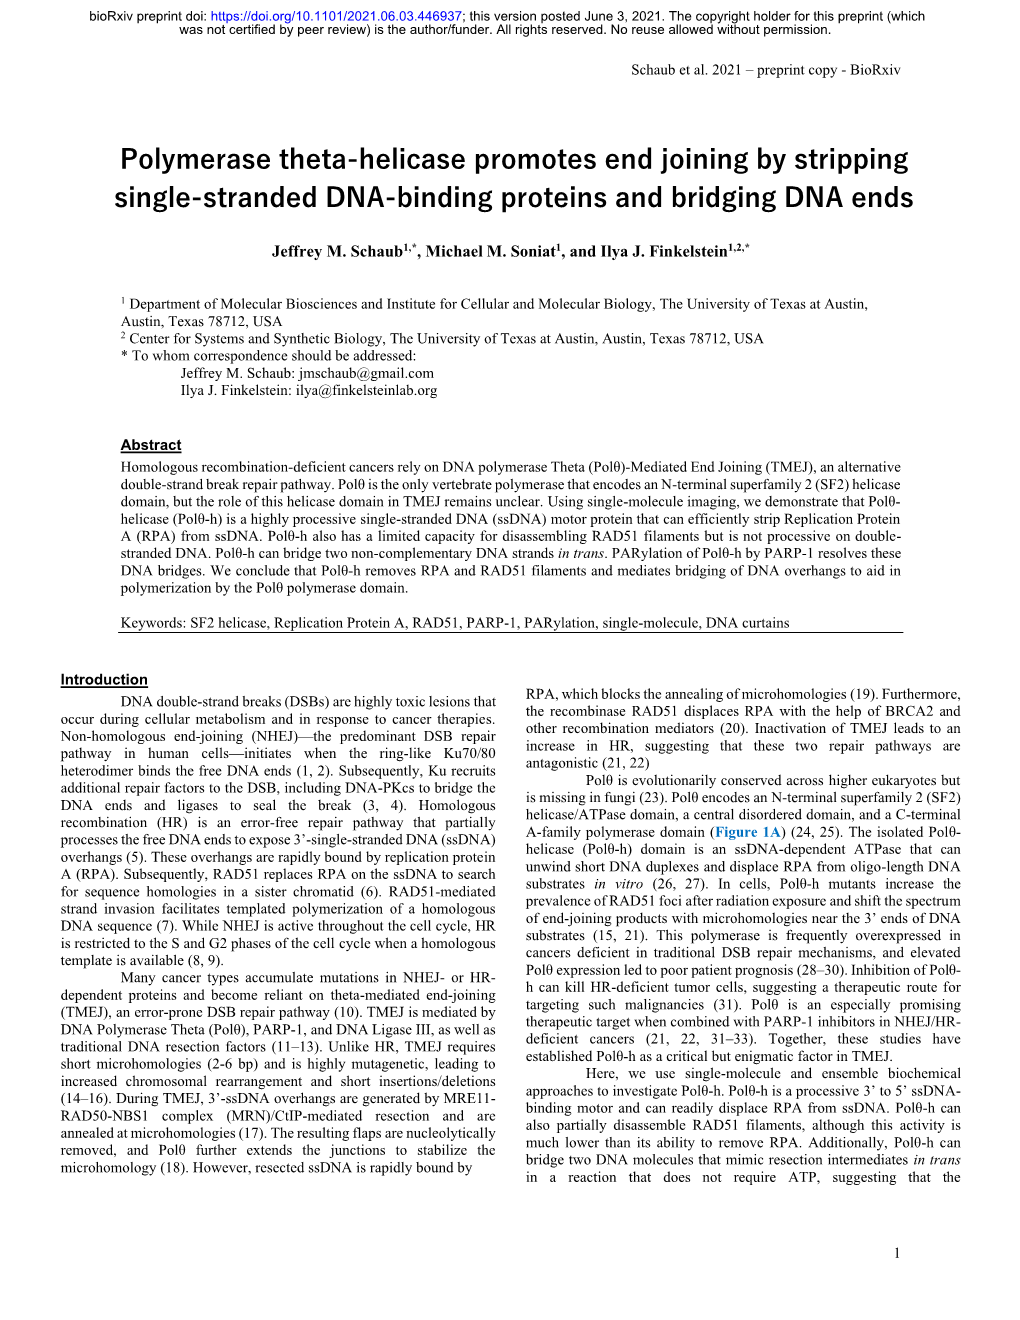 Polymerase Theta-Helicase Promotes End Joining by Stripping Single-Stranded DNA-Binding Proteins and Bridging DNA Ends